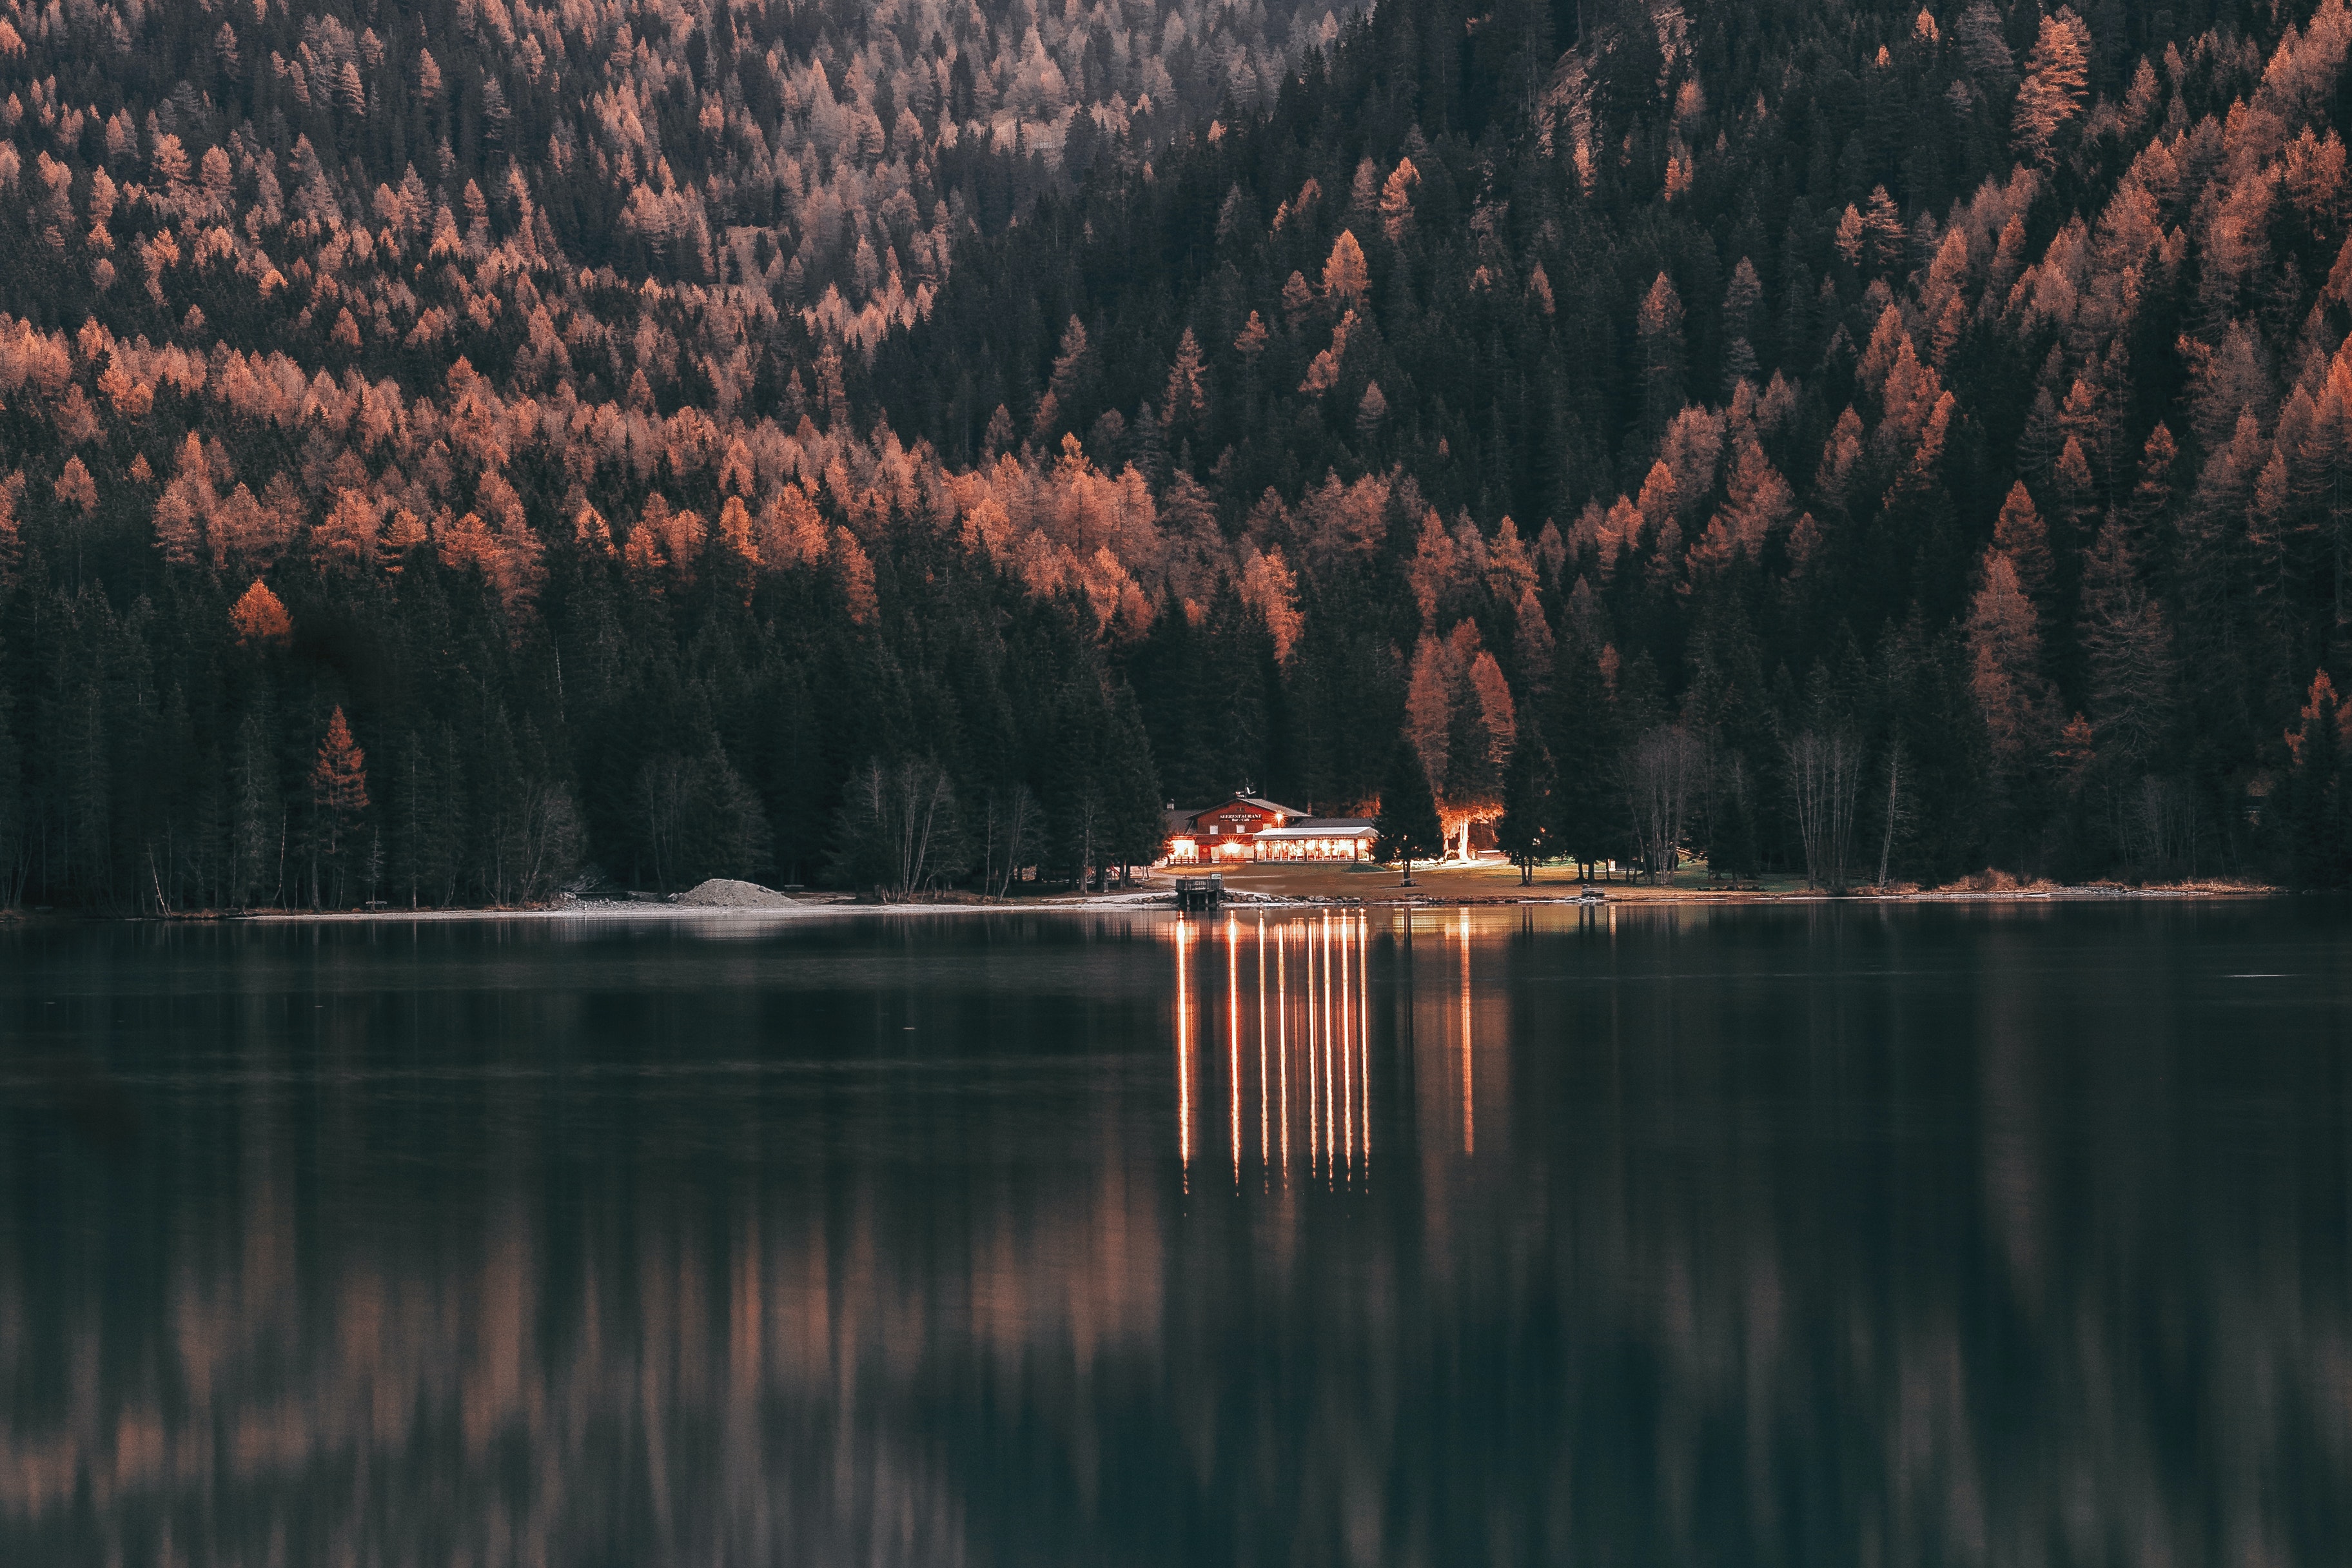 A house on a lake surrounded by trees. - Nature